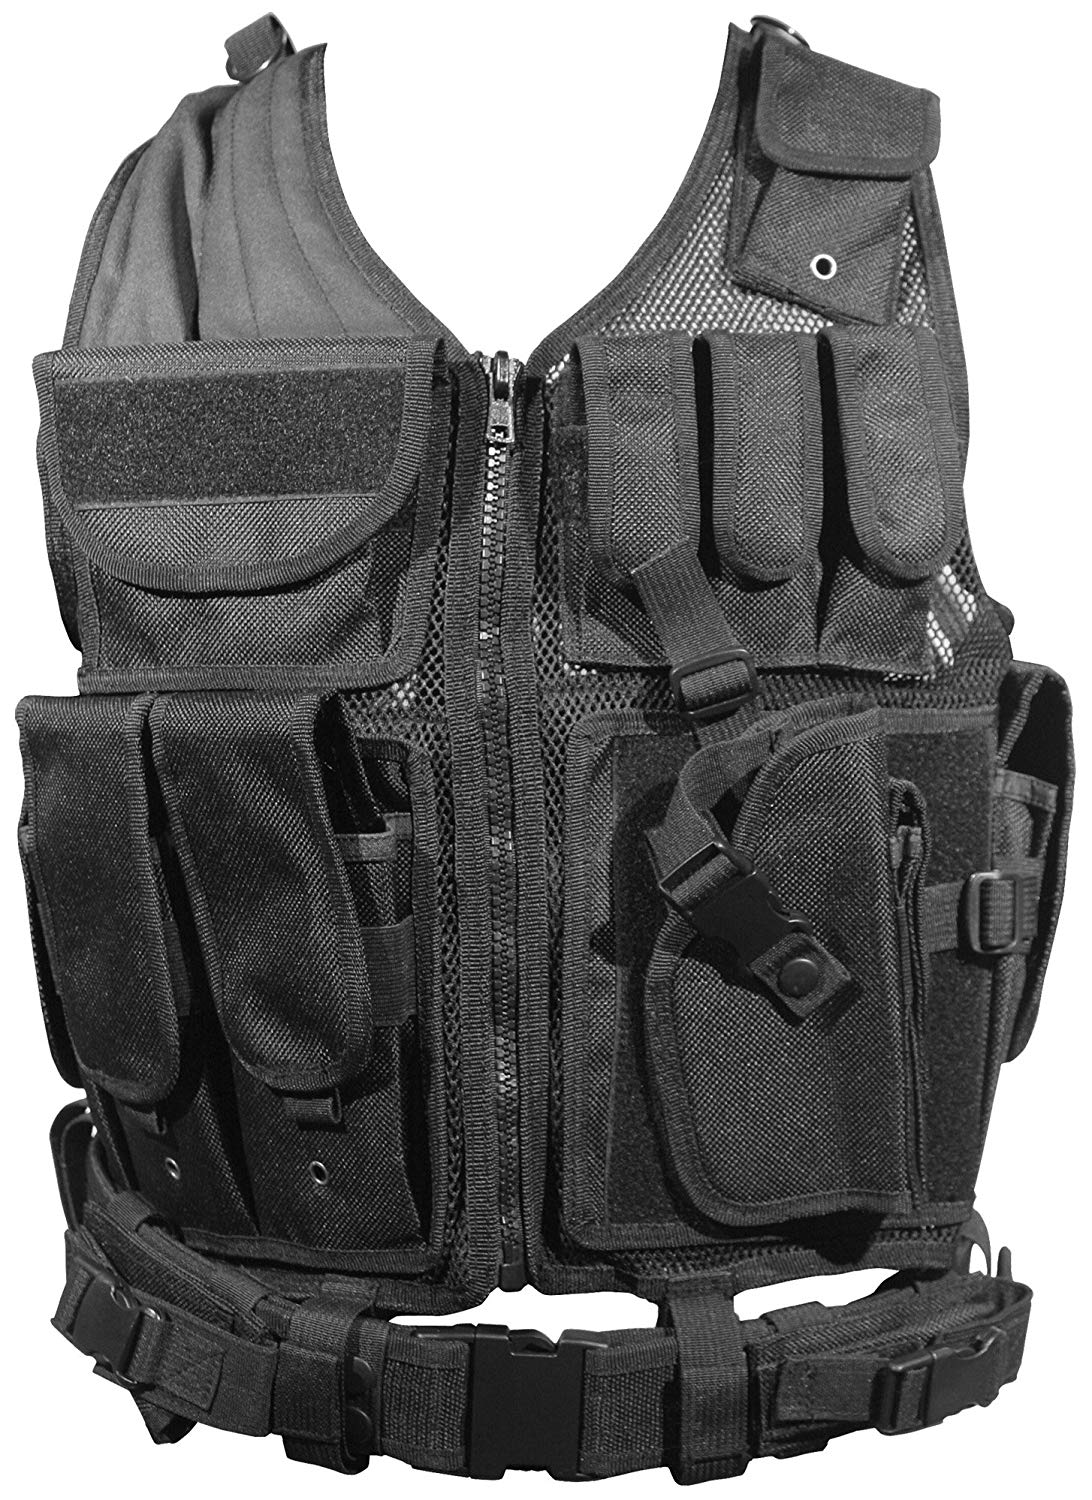 10 Best Tactical Chest Rigs Reviewed in 2022 | TheGearHunt